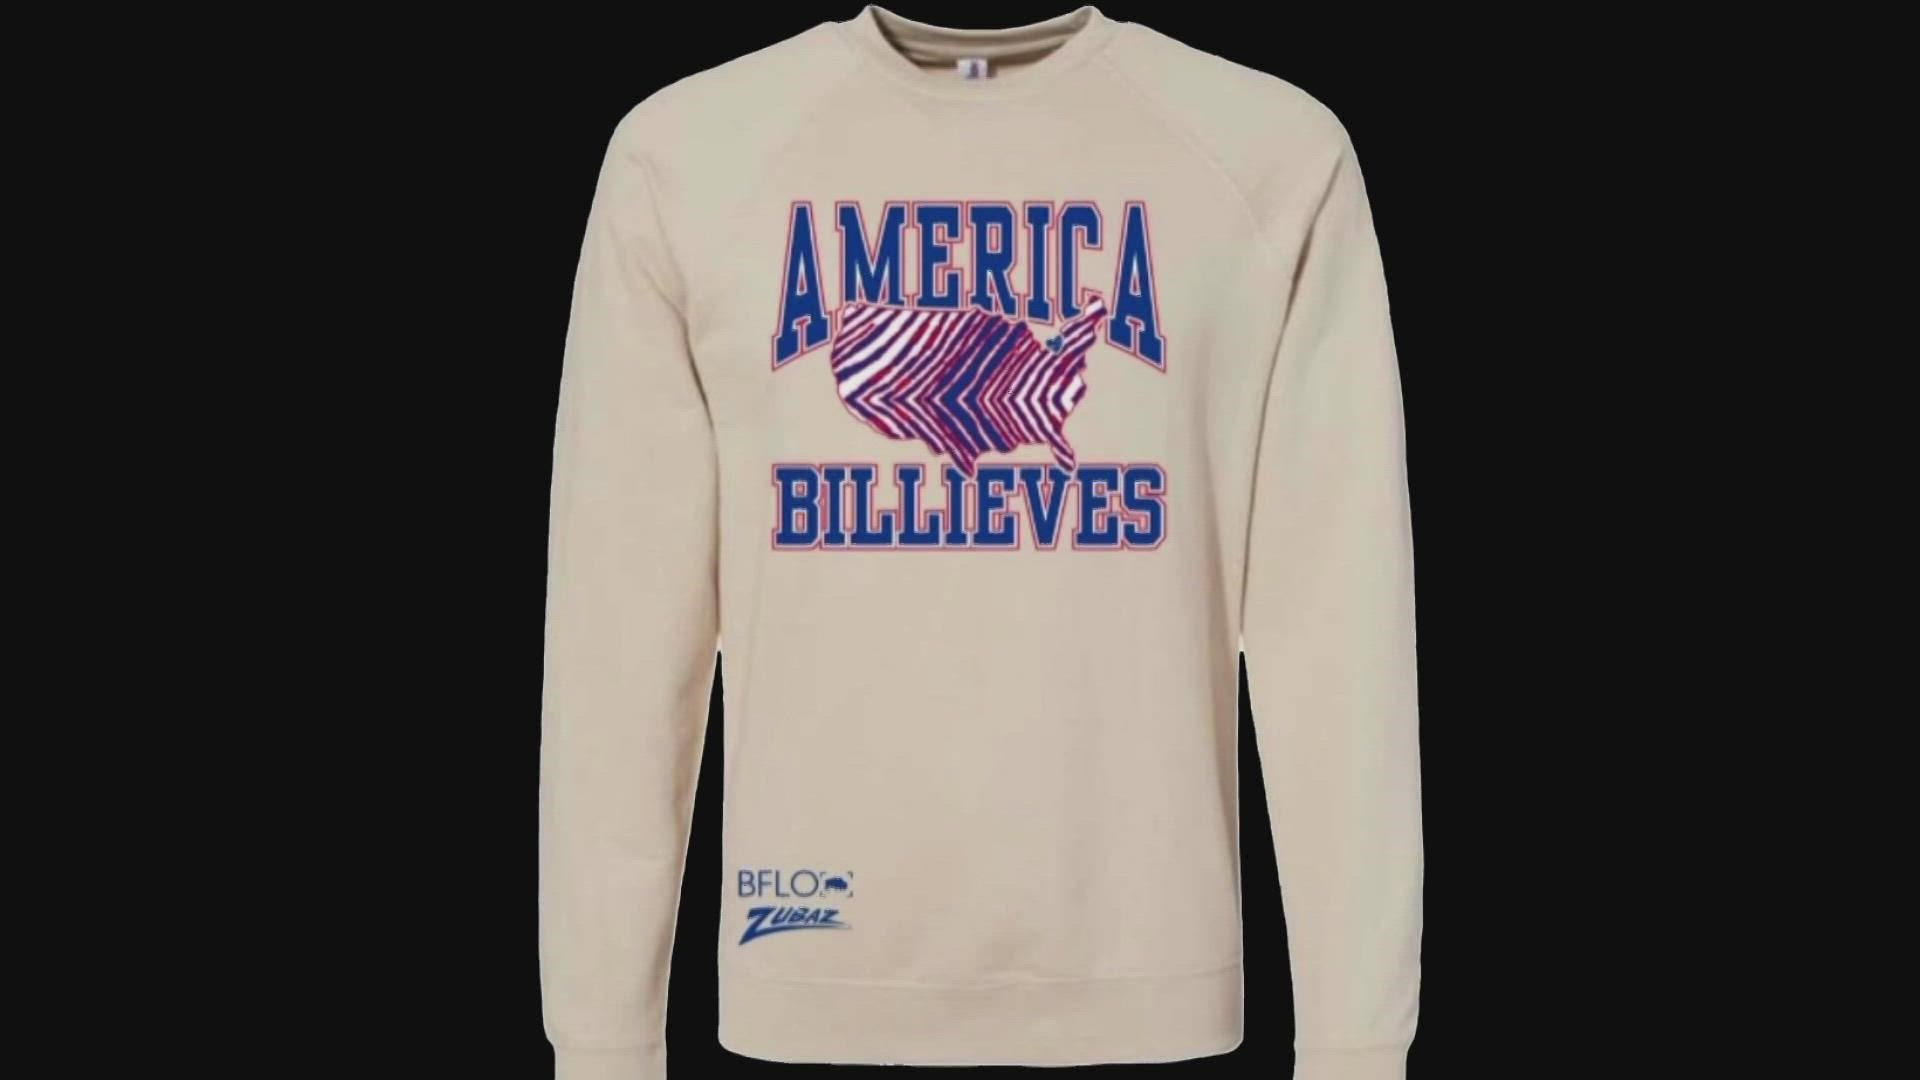 Buffalo Store and 716 Store raise funds with sweatshirts and T-shirts